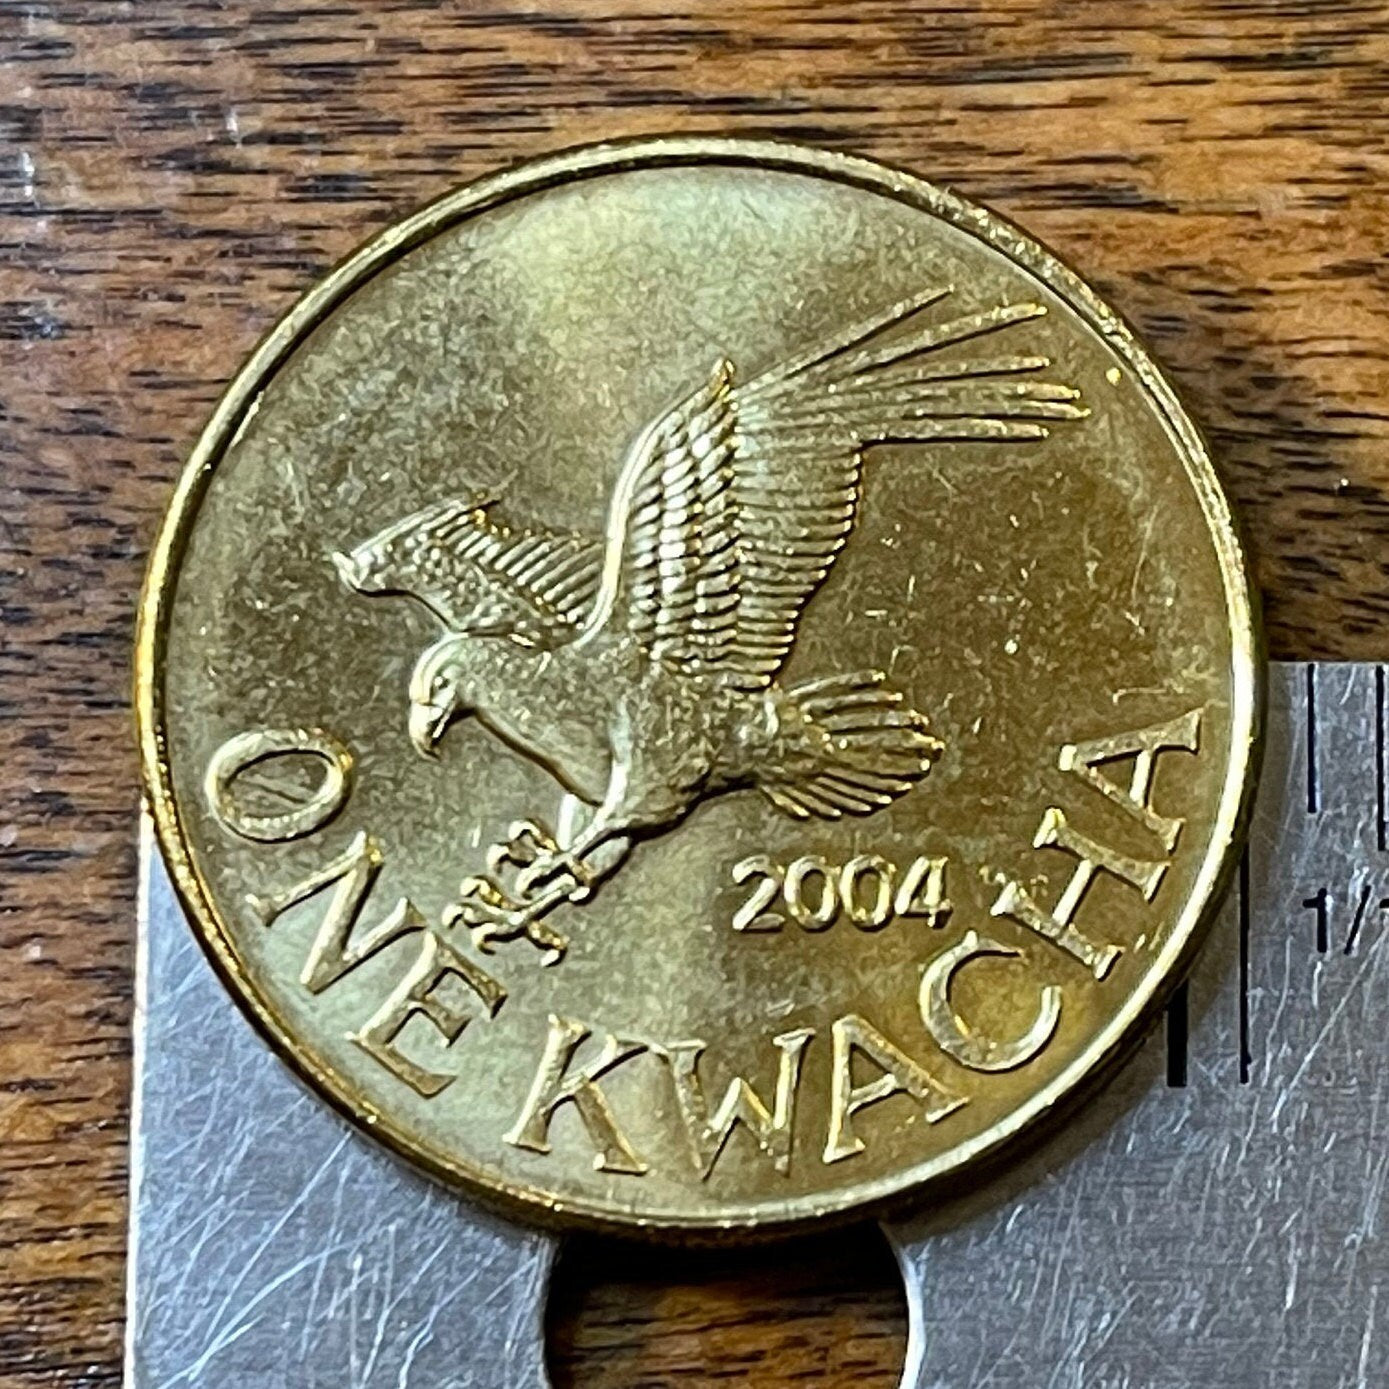 African Fish Eagle Malawi 1 Kwacha Authentic Coin Money for Jewelry and Craft Making